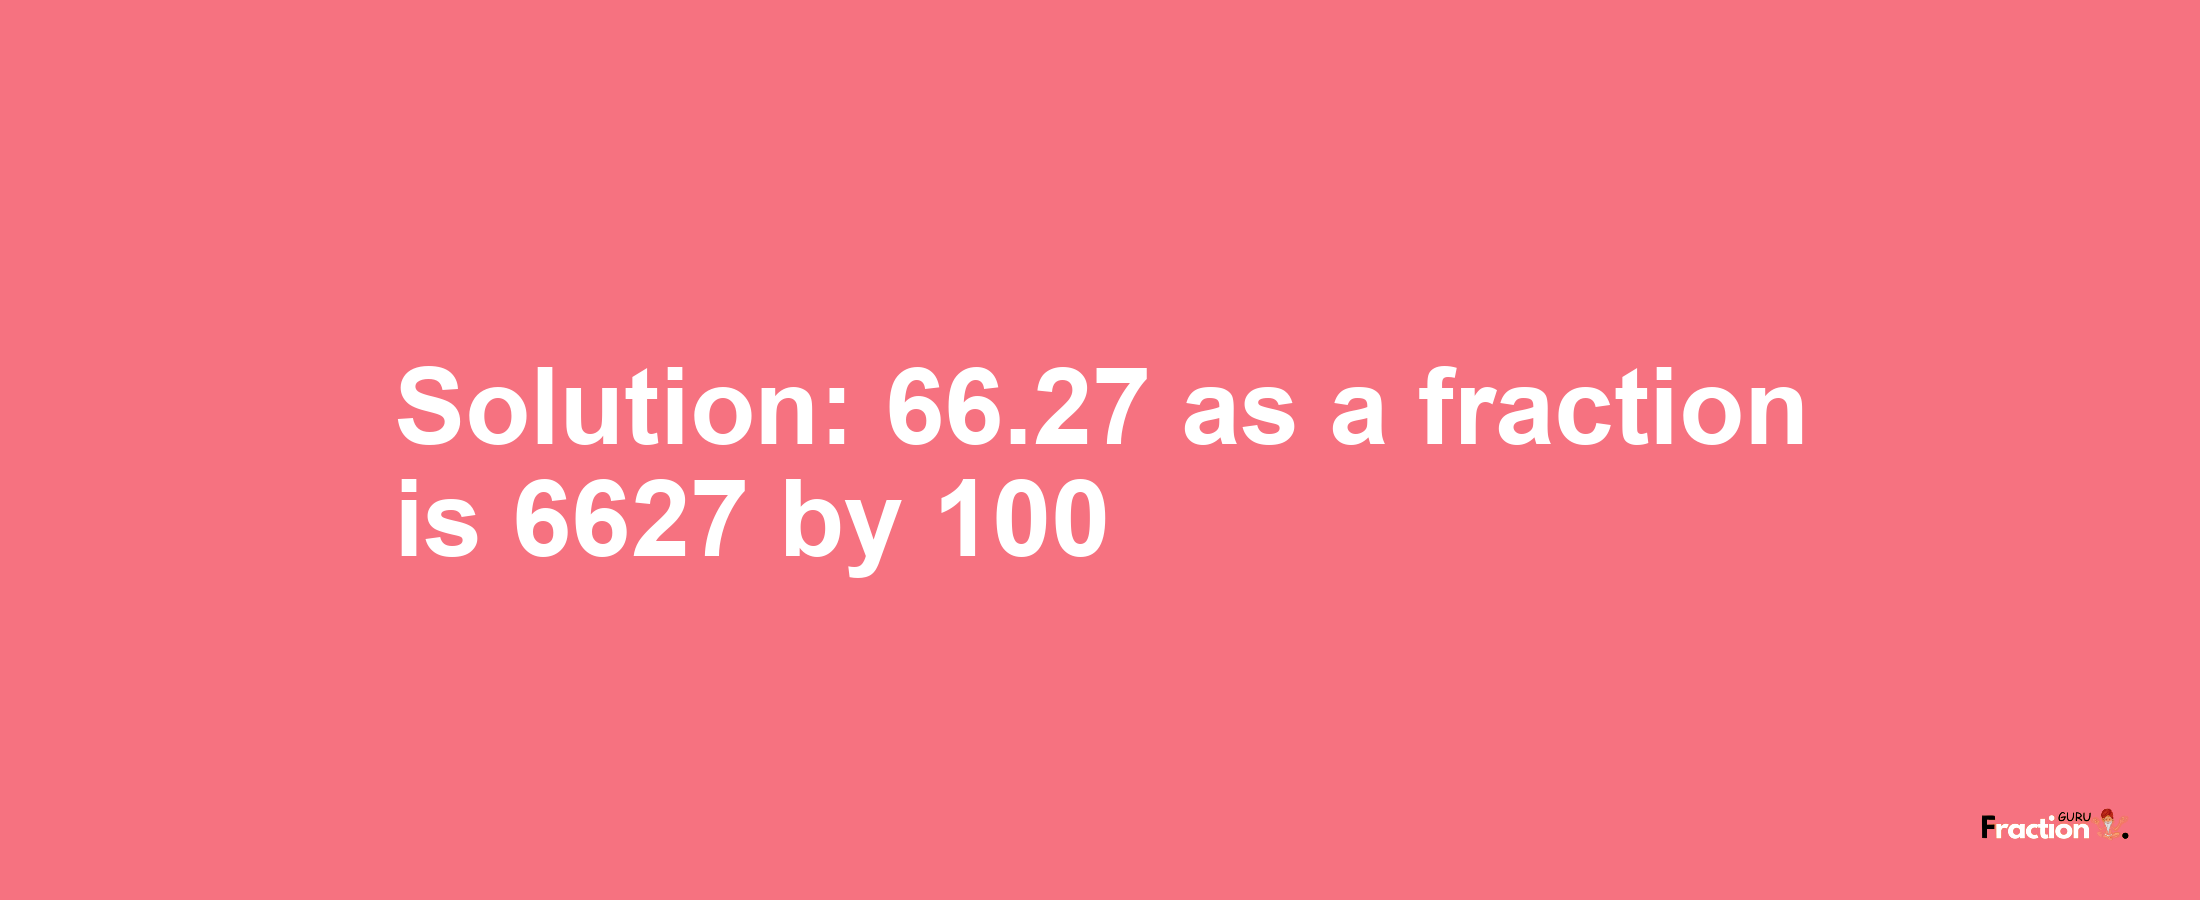 Solution:66.27 as a fraction is 6627/100